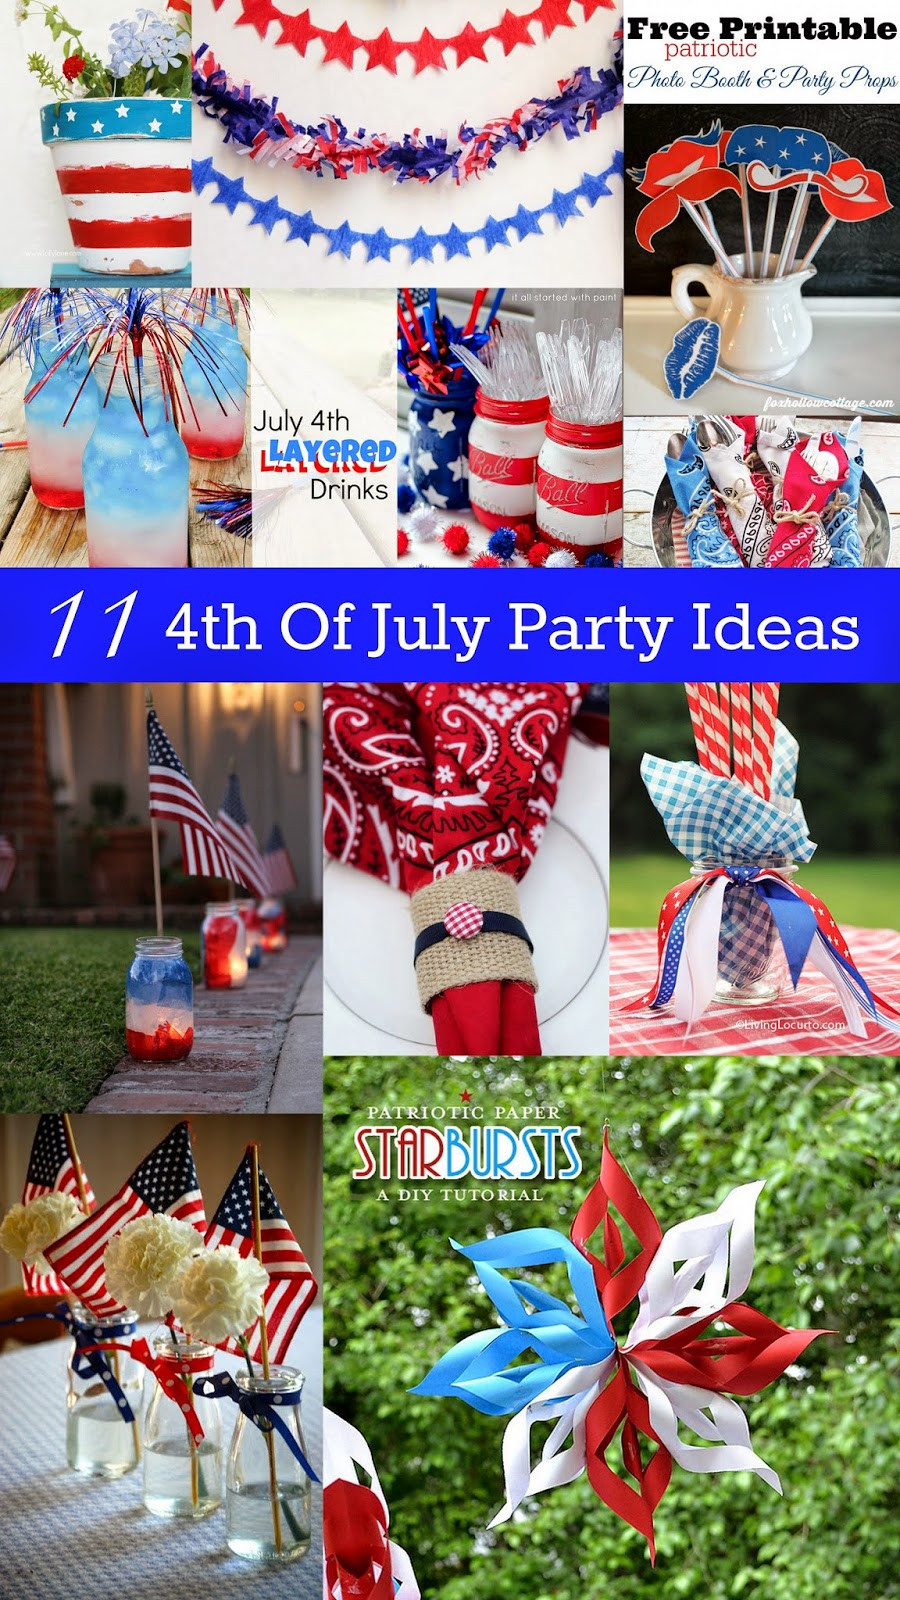 4th Of July Birthday Ideas
 Housewife Eclectic 11 4th of July Party Ideas